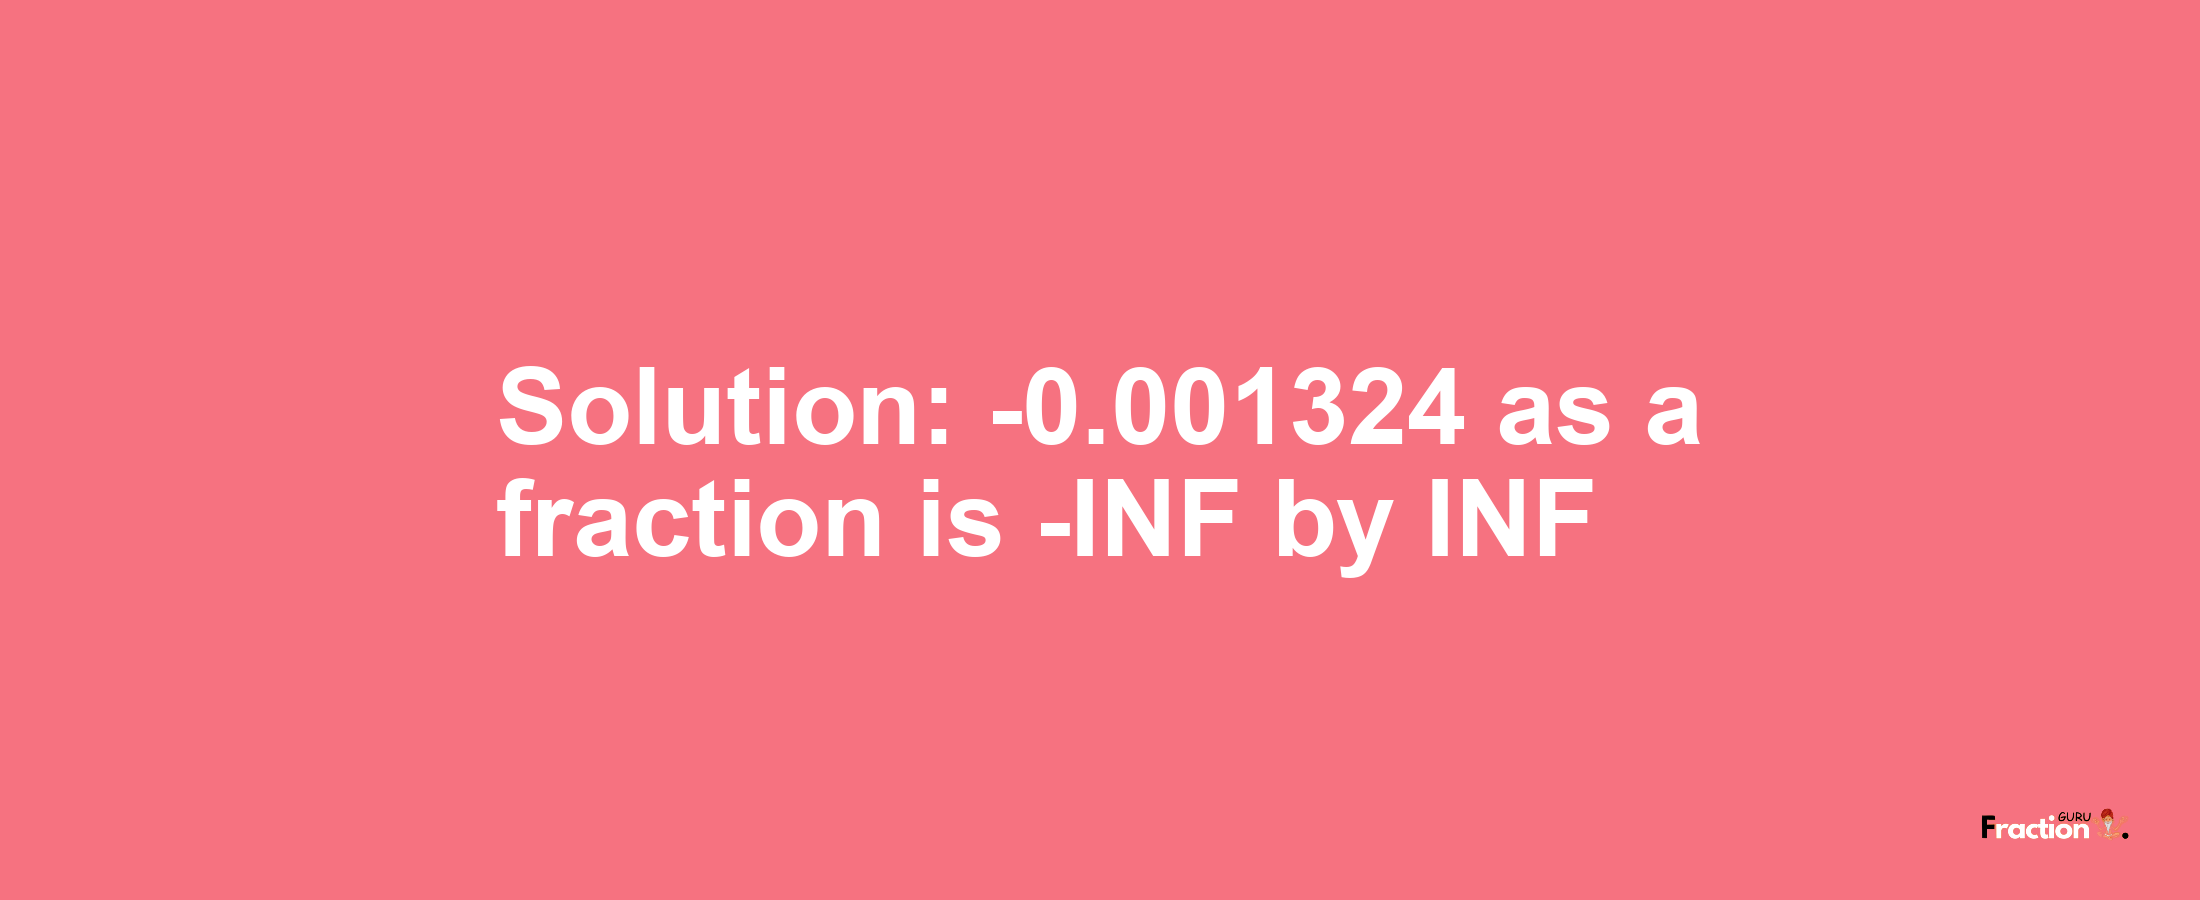 Solution:-0.001324 as a fraction is -INF/INF